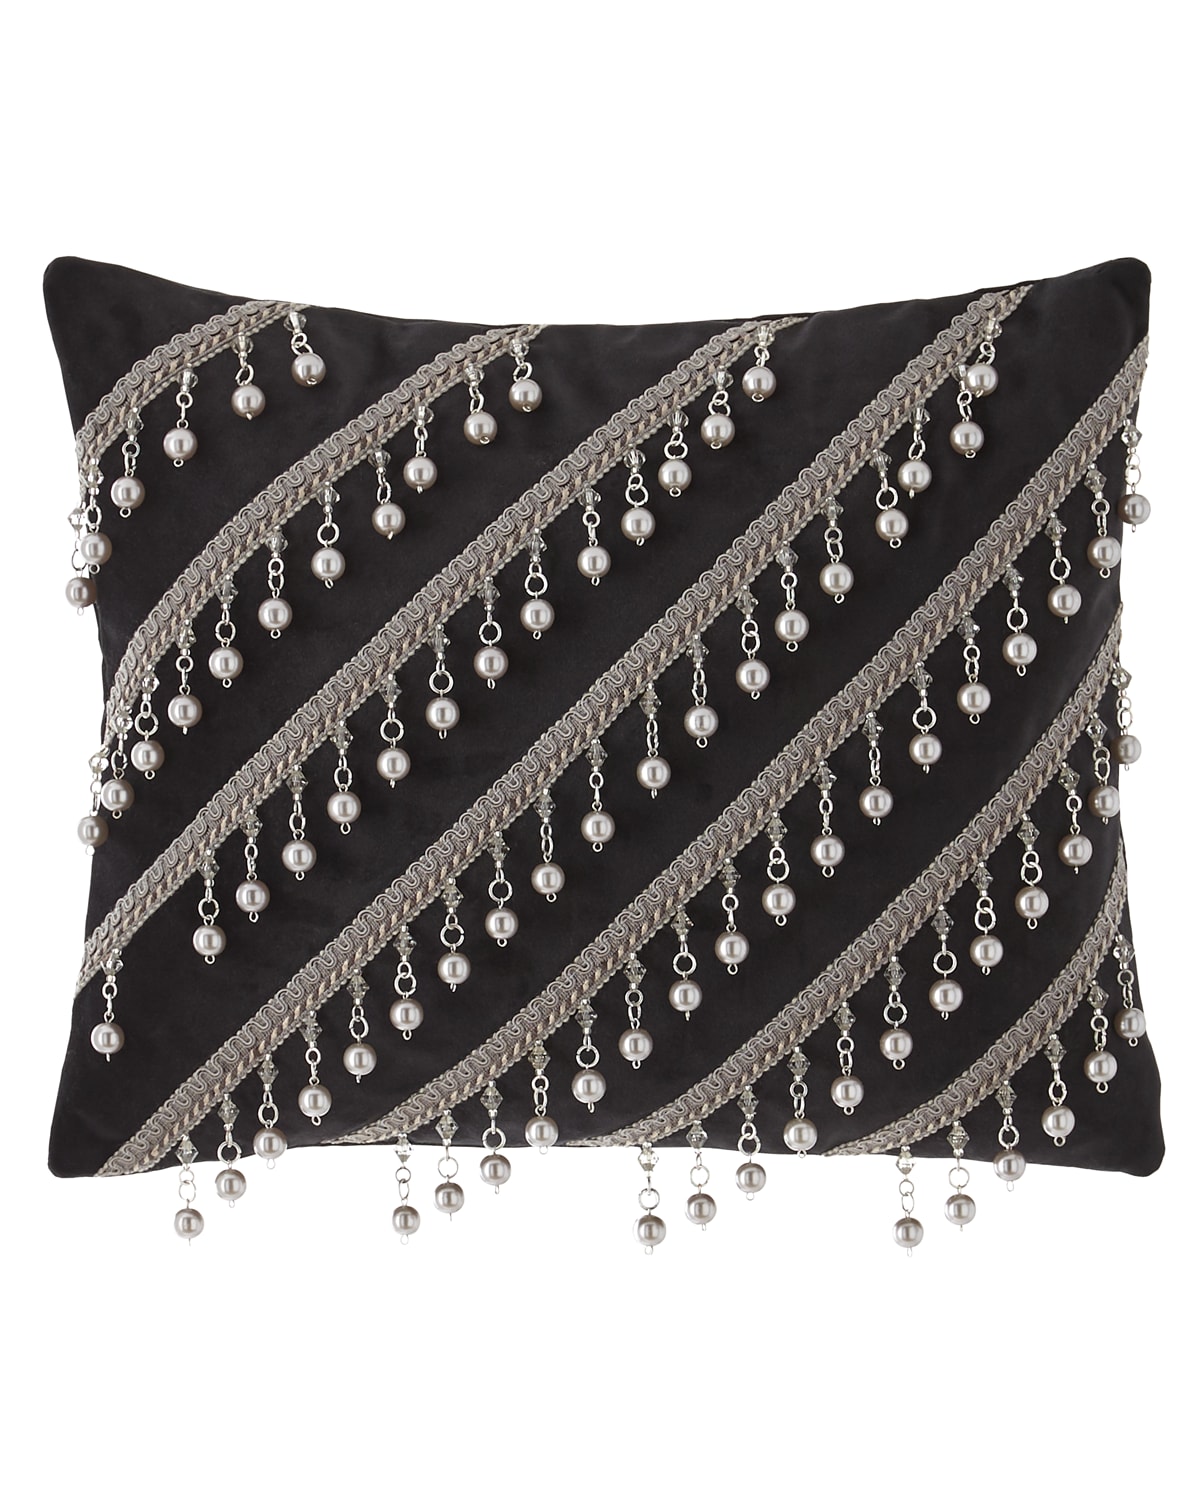 Image Sweet Dreams Bianca Pillow with Pearly Bead Trim